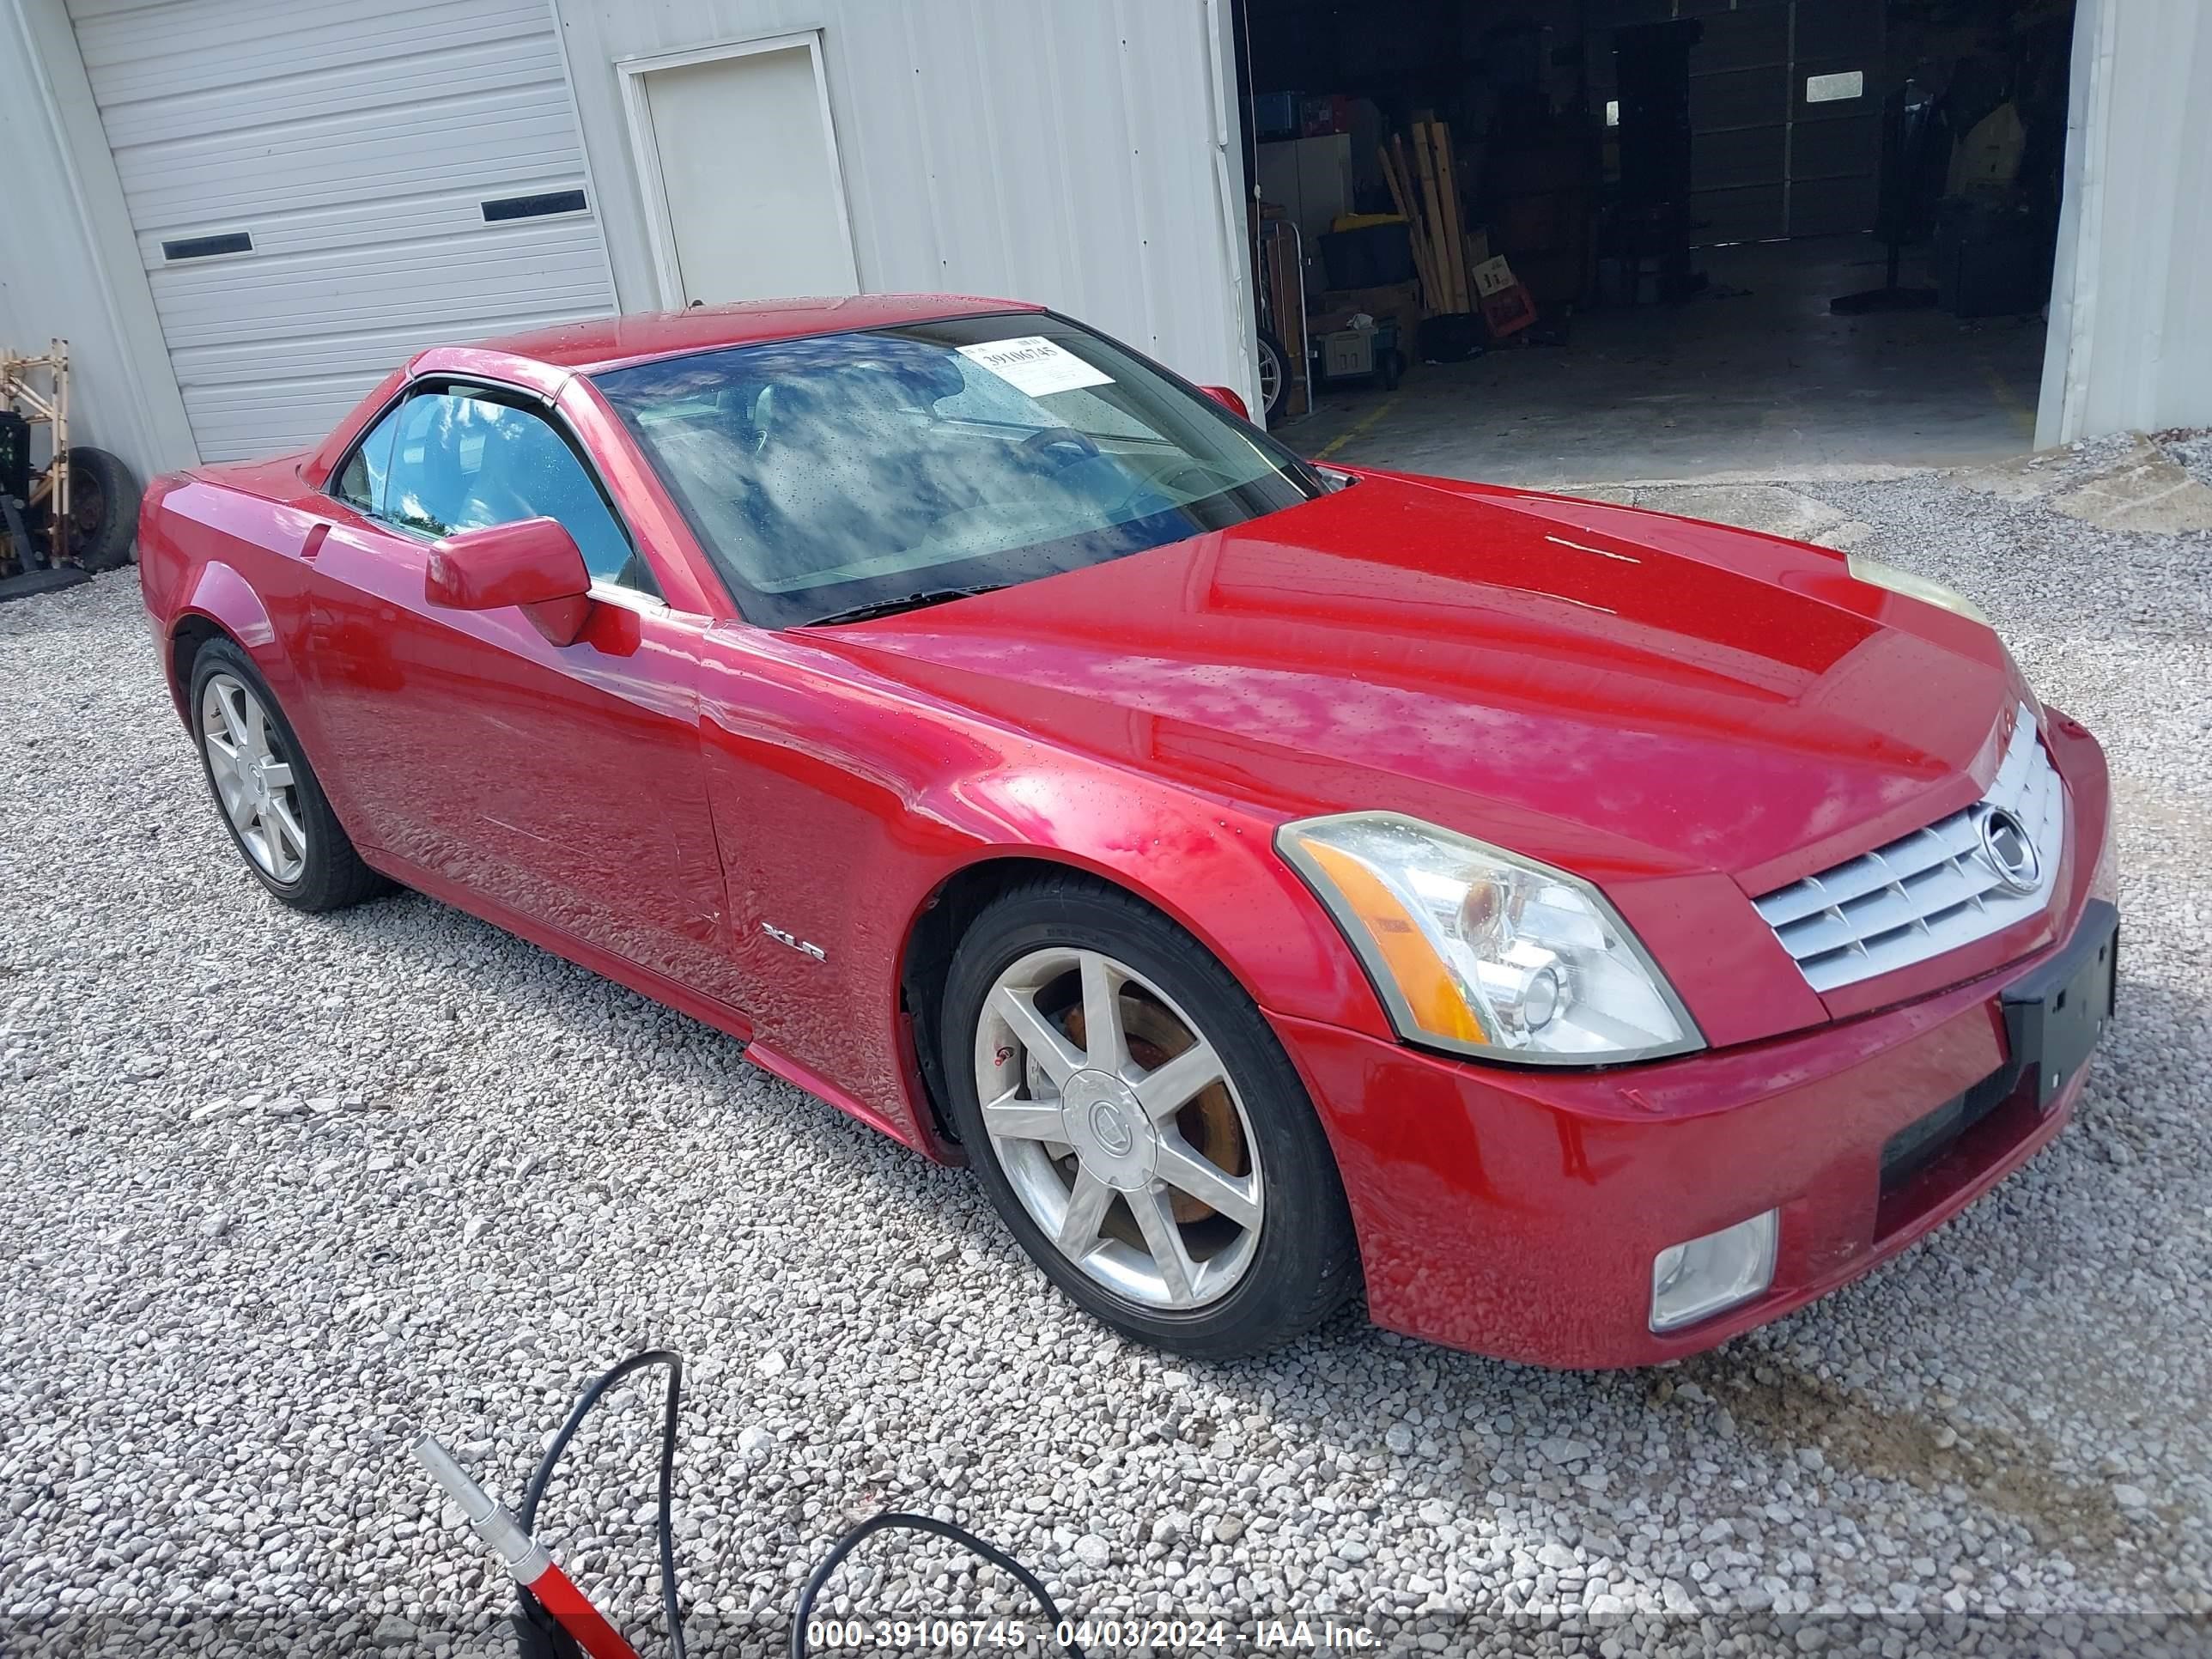 vin: 1G6YV34A755600455 1G6YV34A755600455 2005 cadillac xlr 4600 for Sale in 42101, 710 Woodford Avenue, Bowling Green, Kentucky, USA